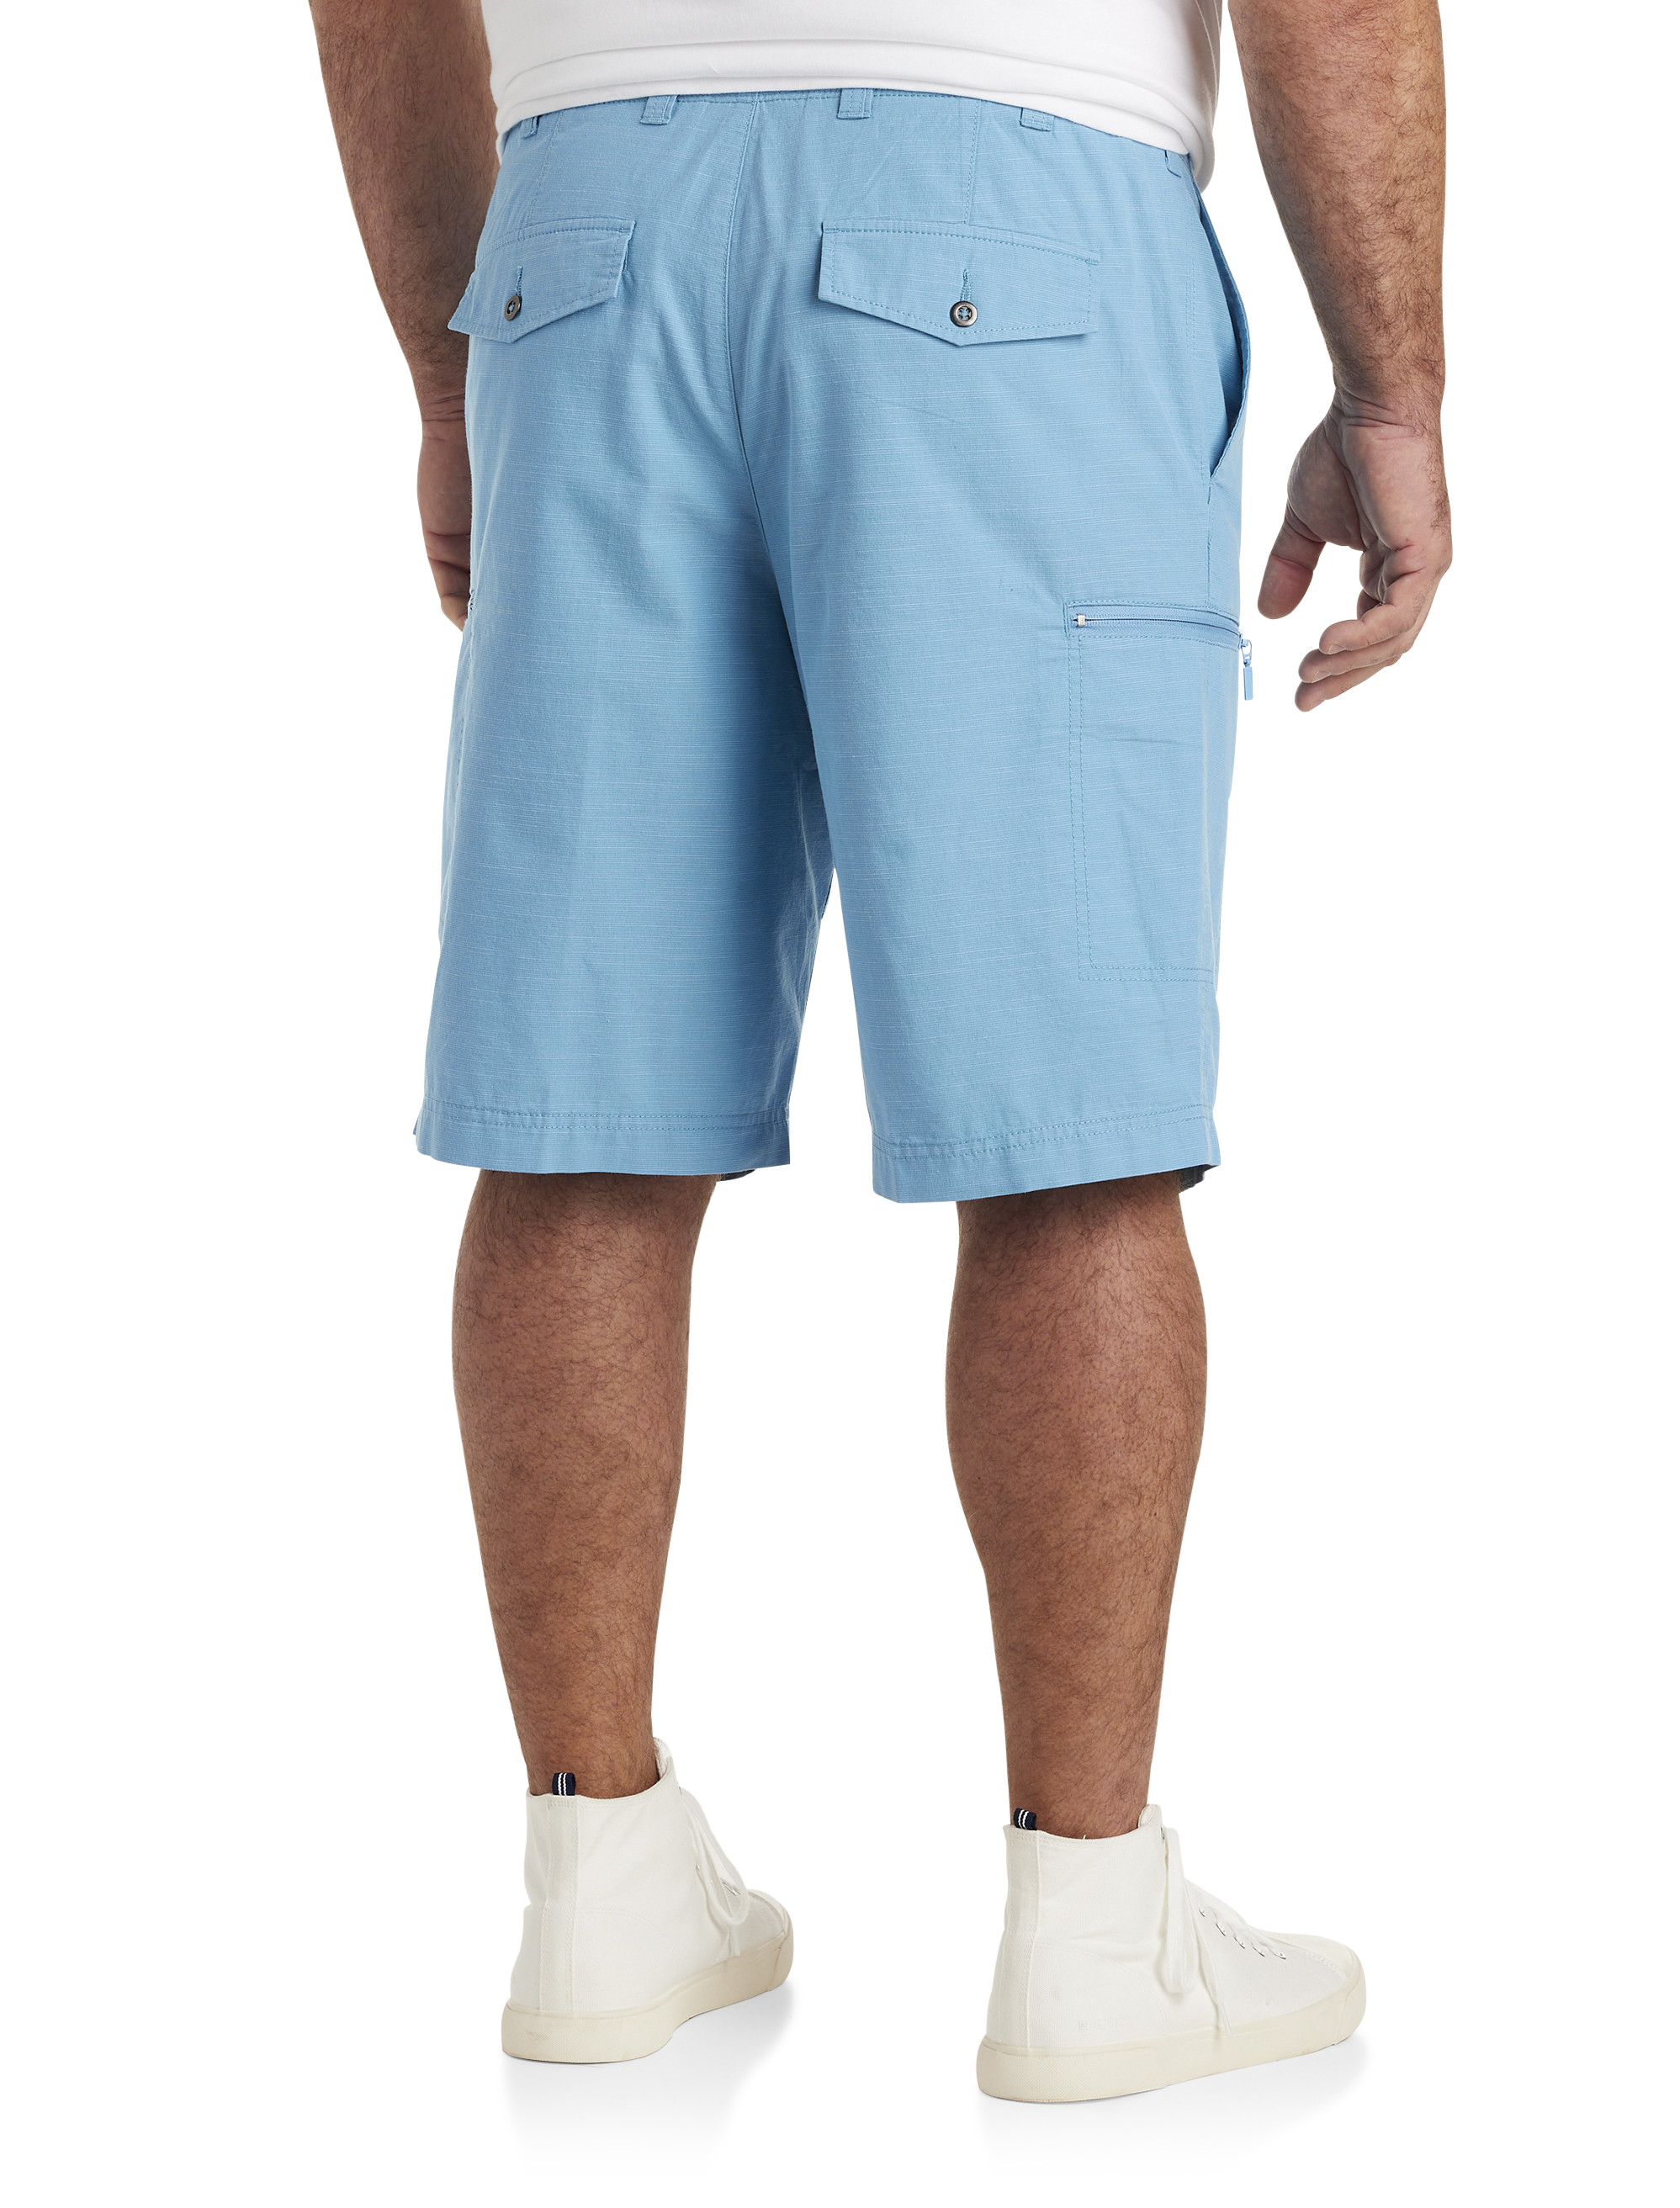 Men's Cargo Shorts, Big and Tall